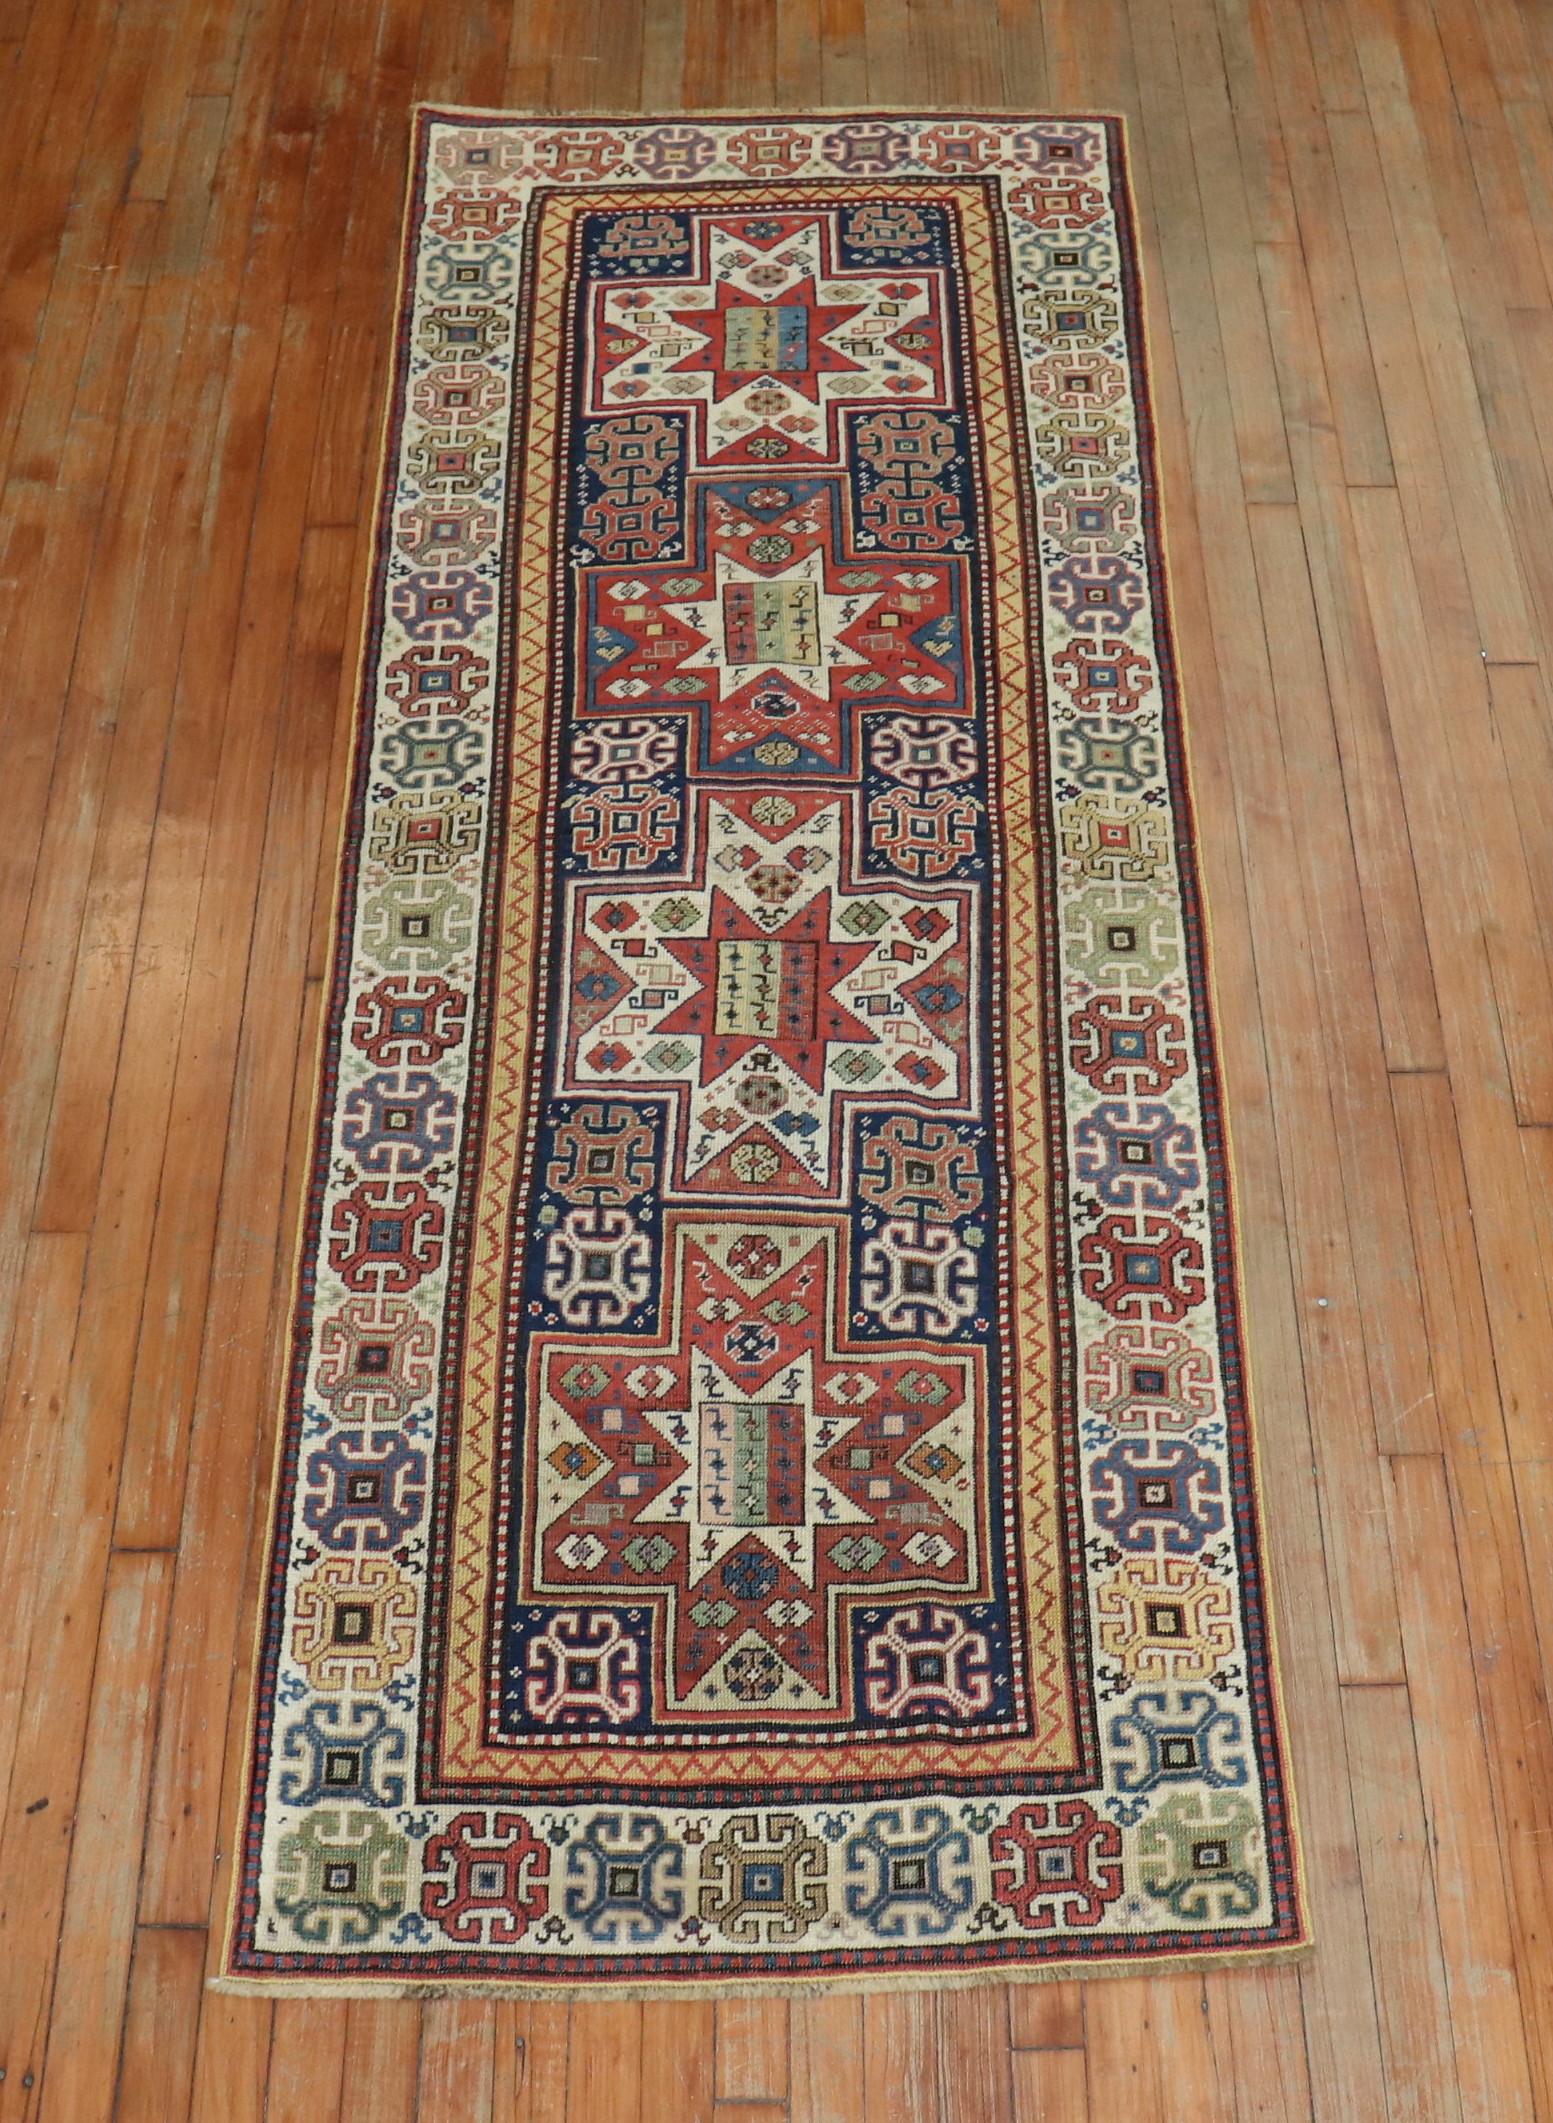 An early 20th century Caucasian Shirvan Runner. Rust, ivory red dominant accents on a navy ground.

Measures: 2'10